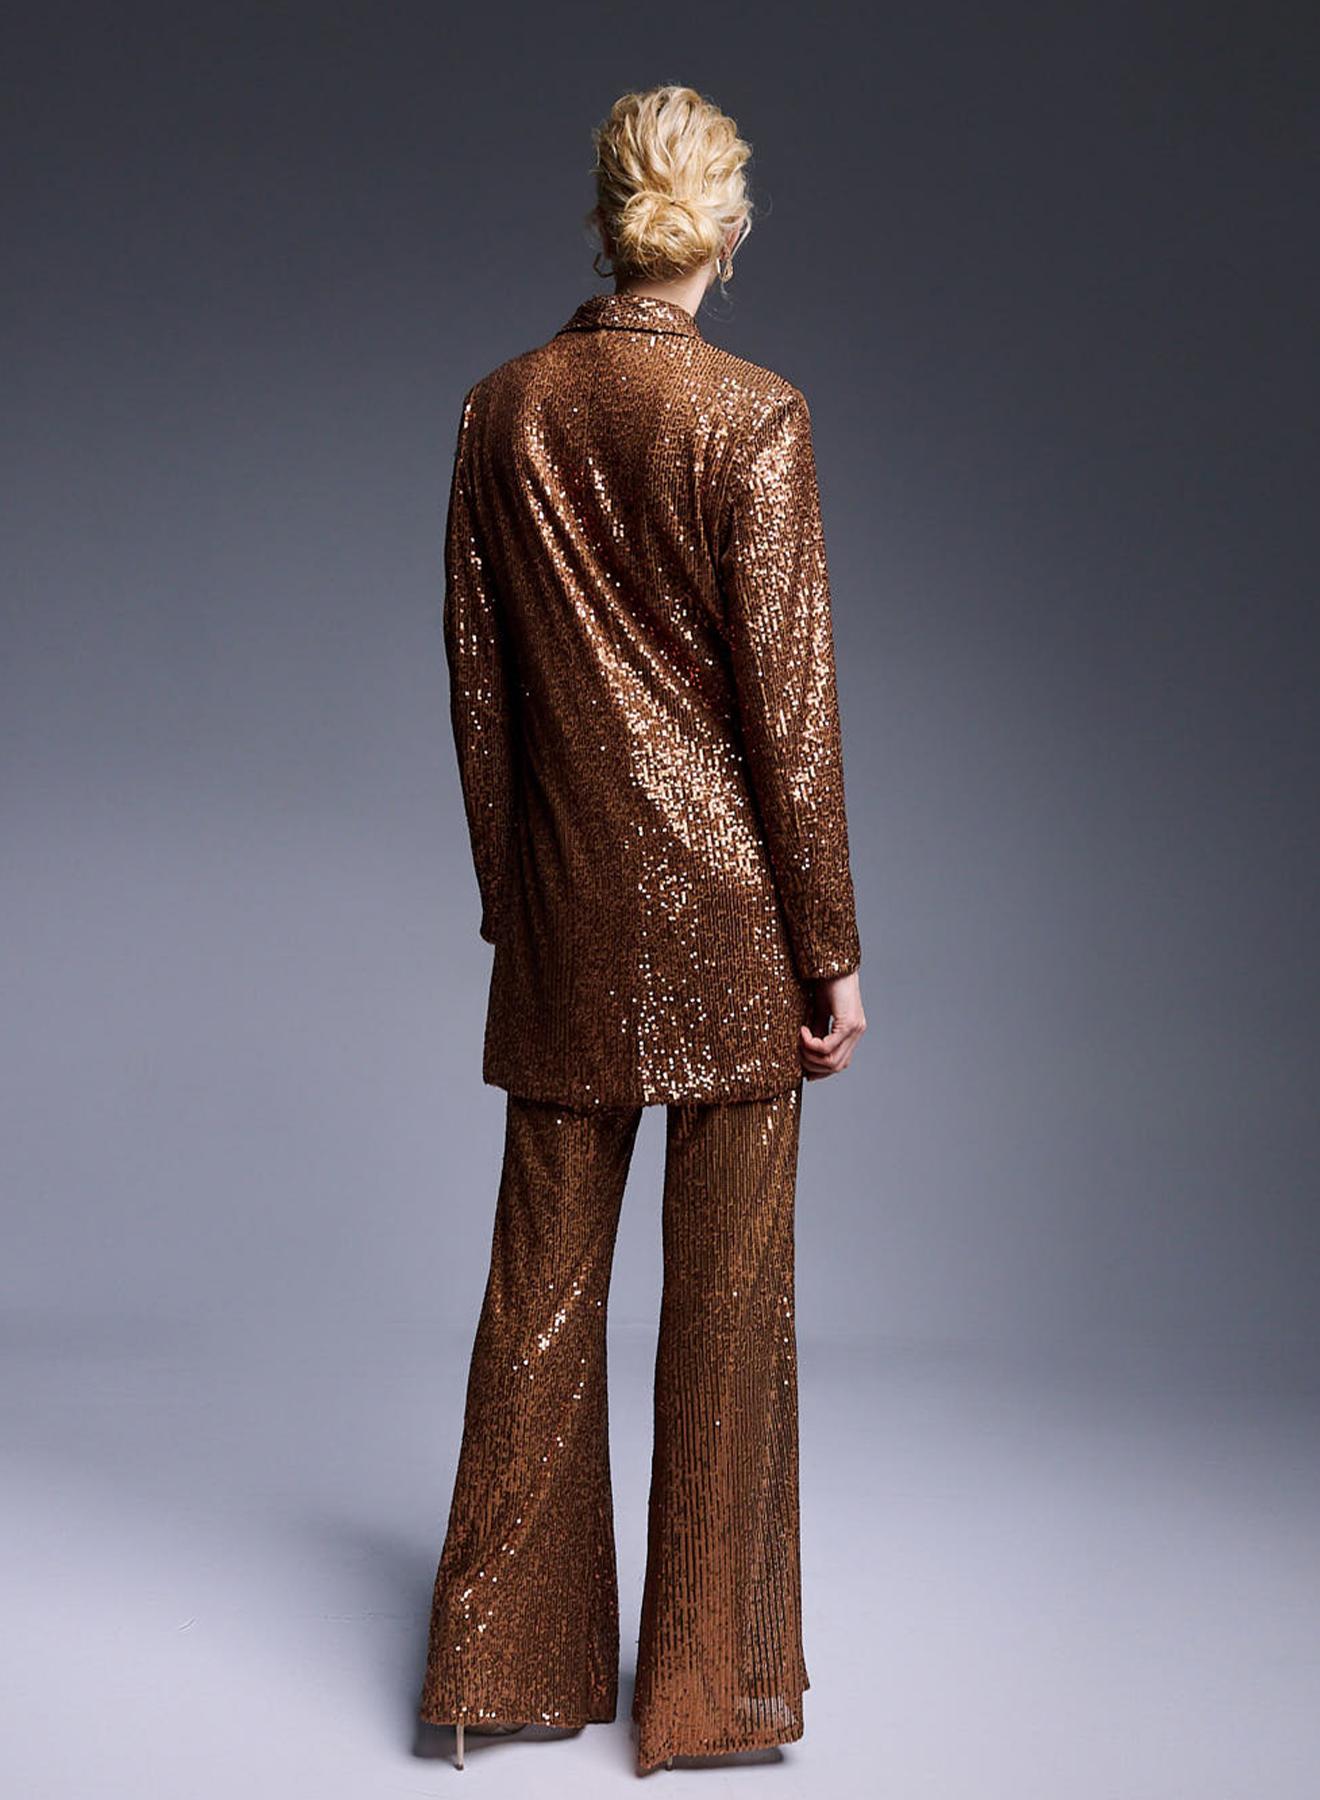 Wide legs Pants with sequins - 4